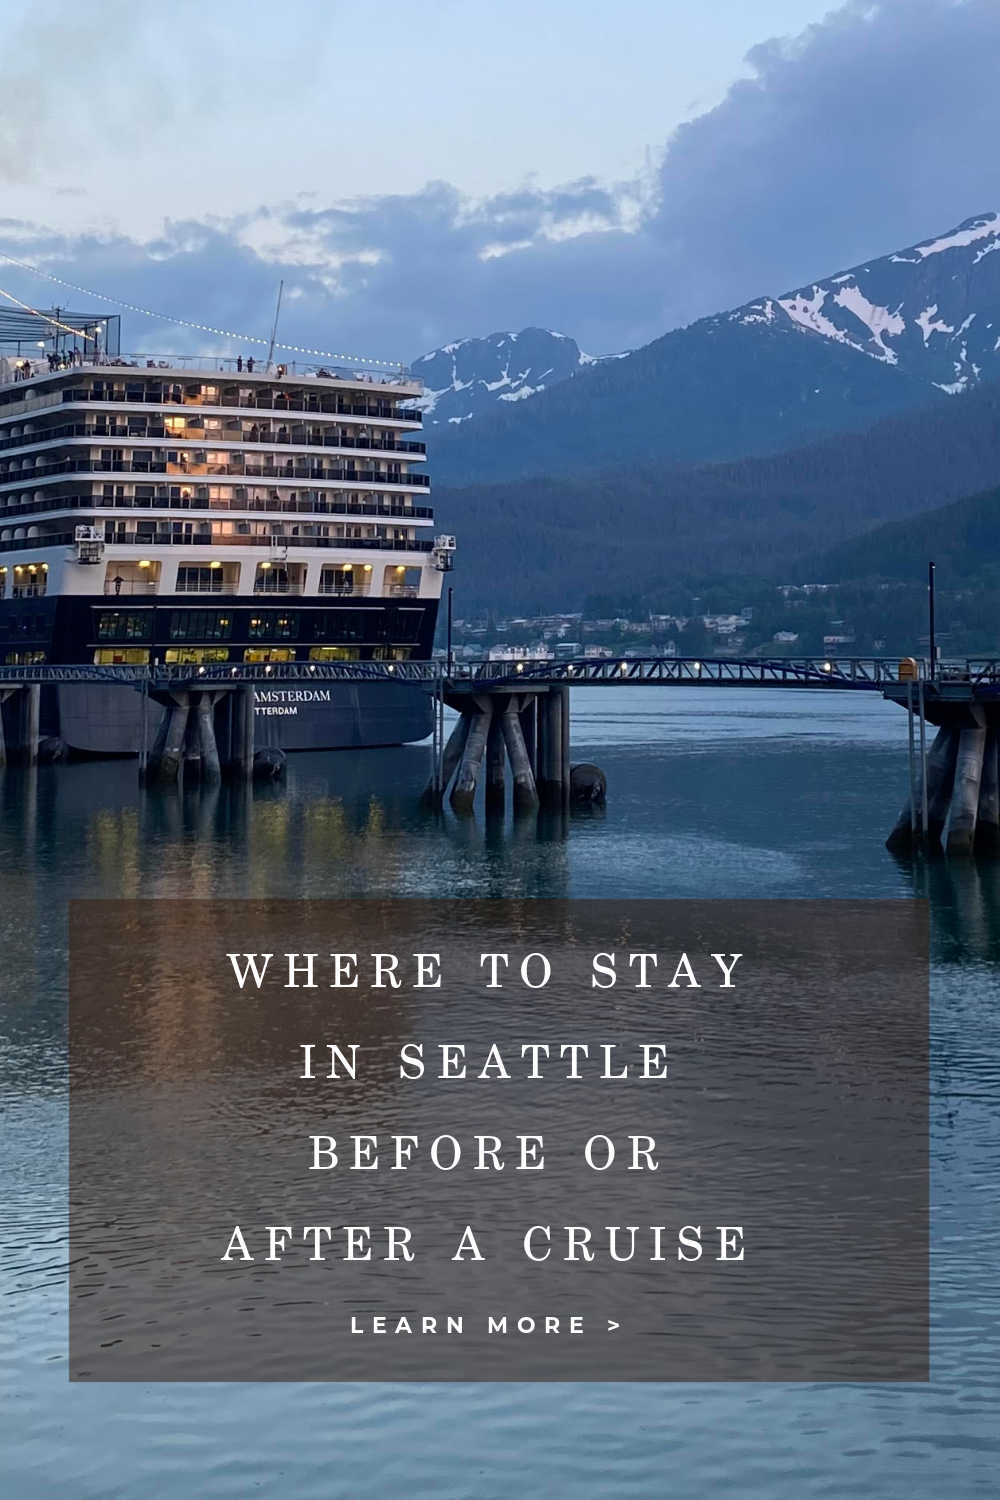 WHERE TO STAY IN SEATTLE BEFORE OR AFTER CRUISE